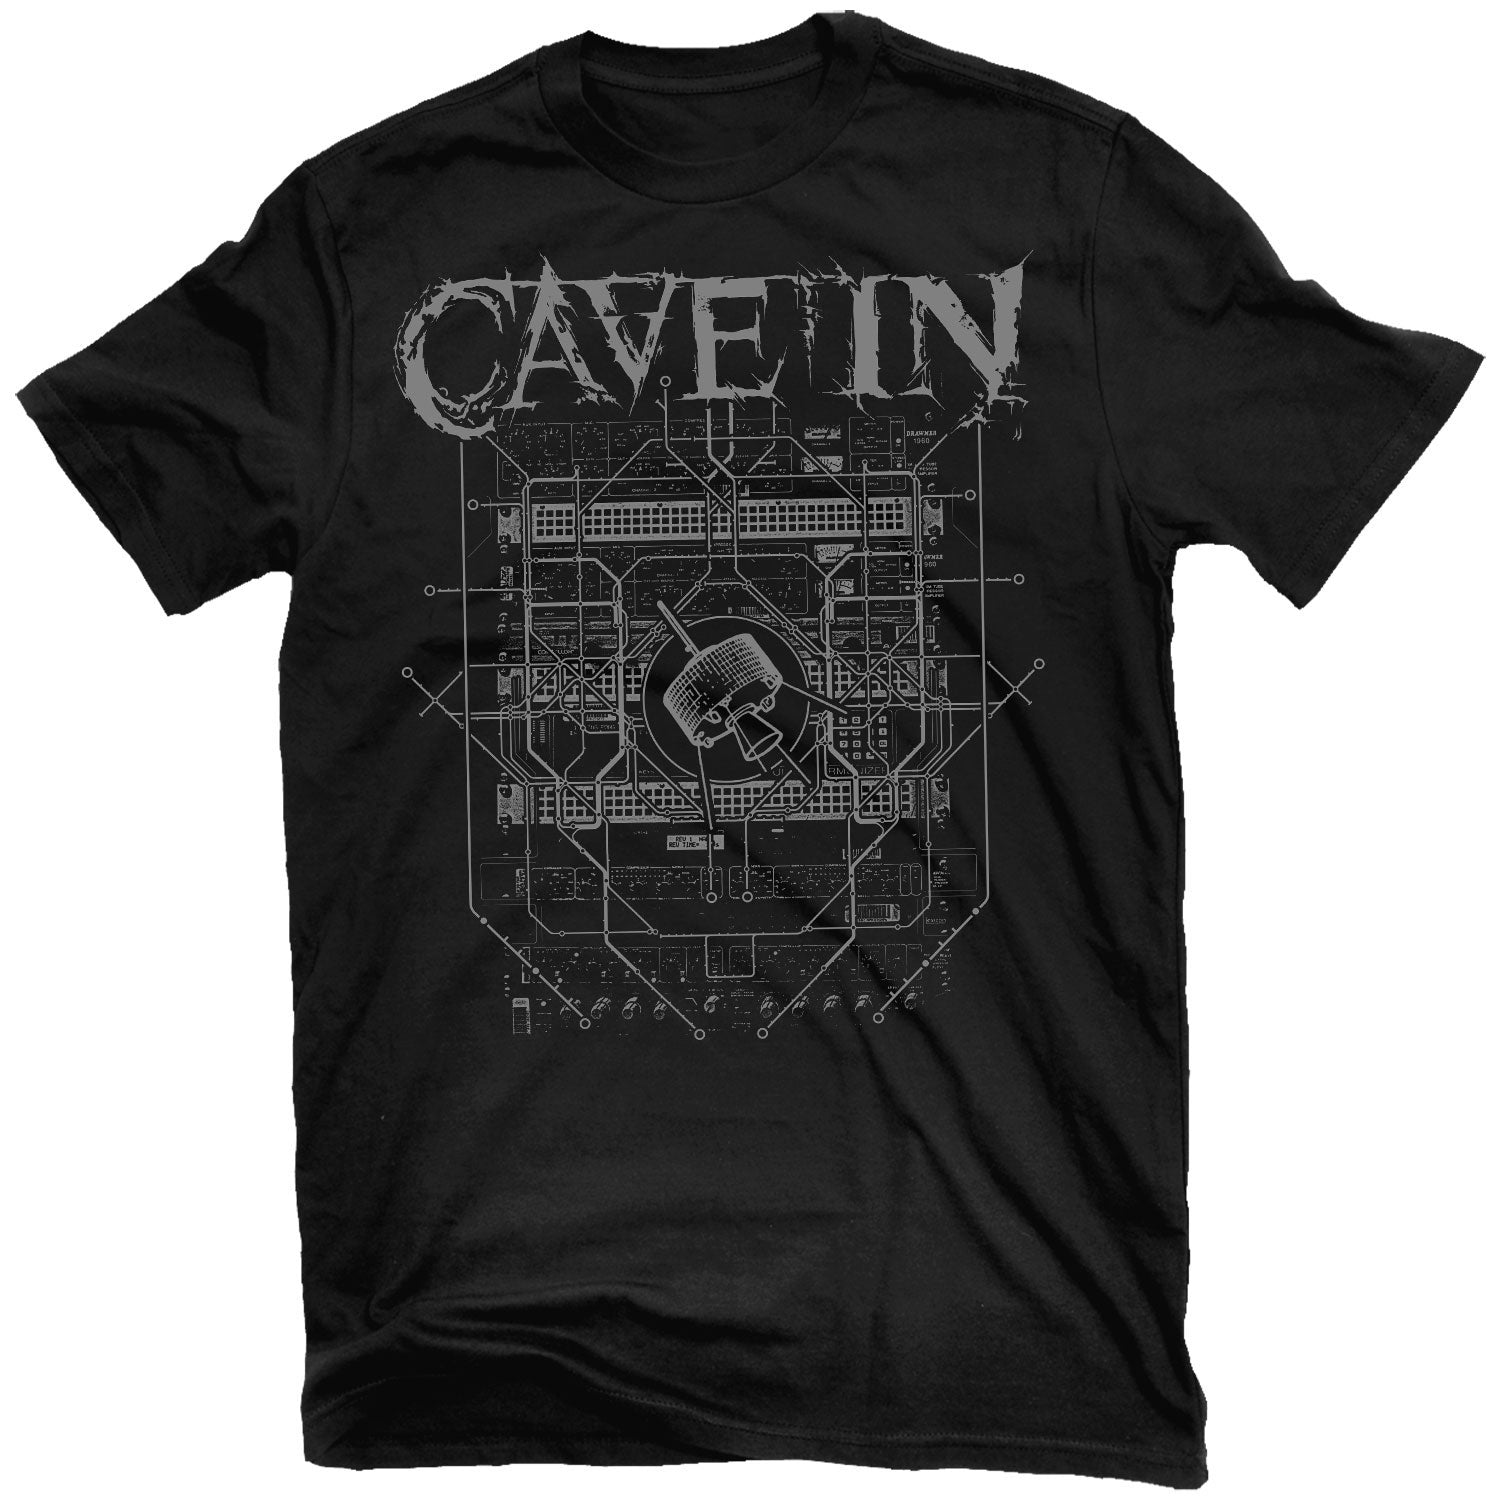 Cave In "Tube Transmission" T-Shirt